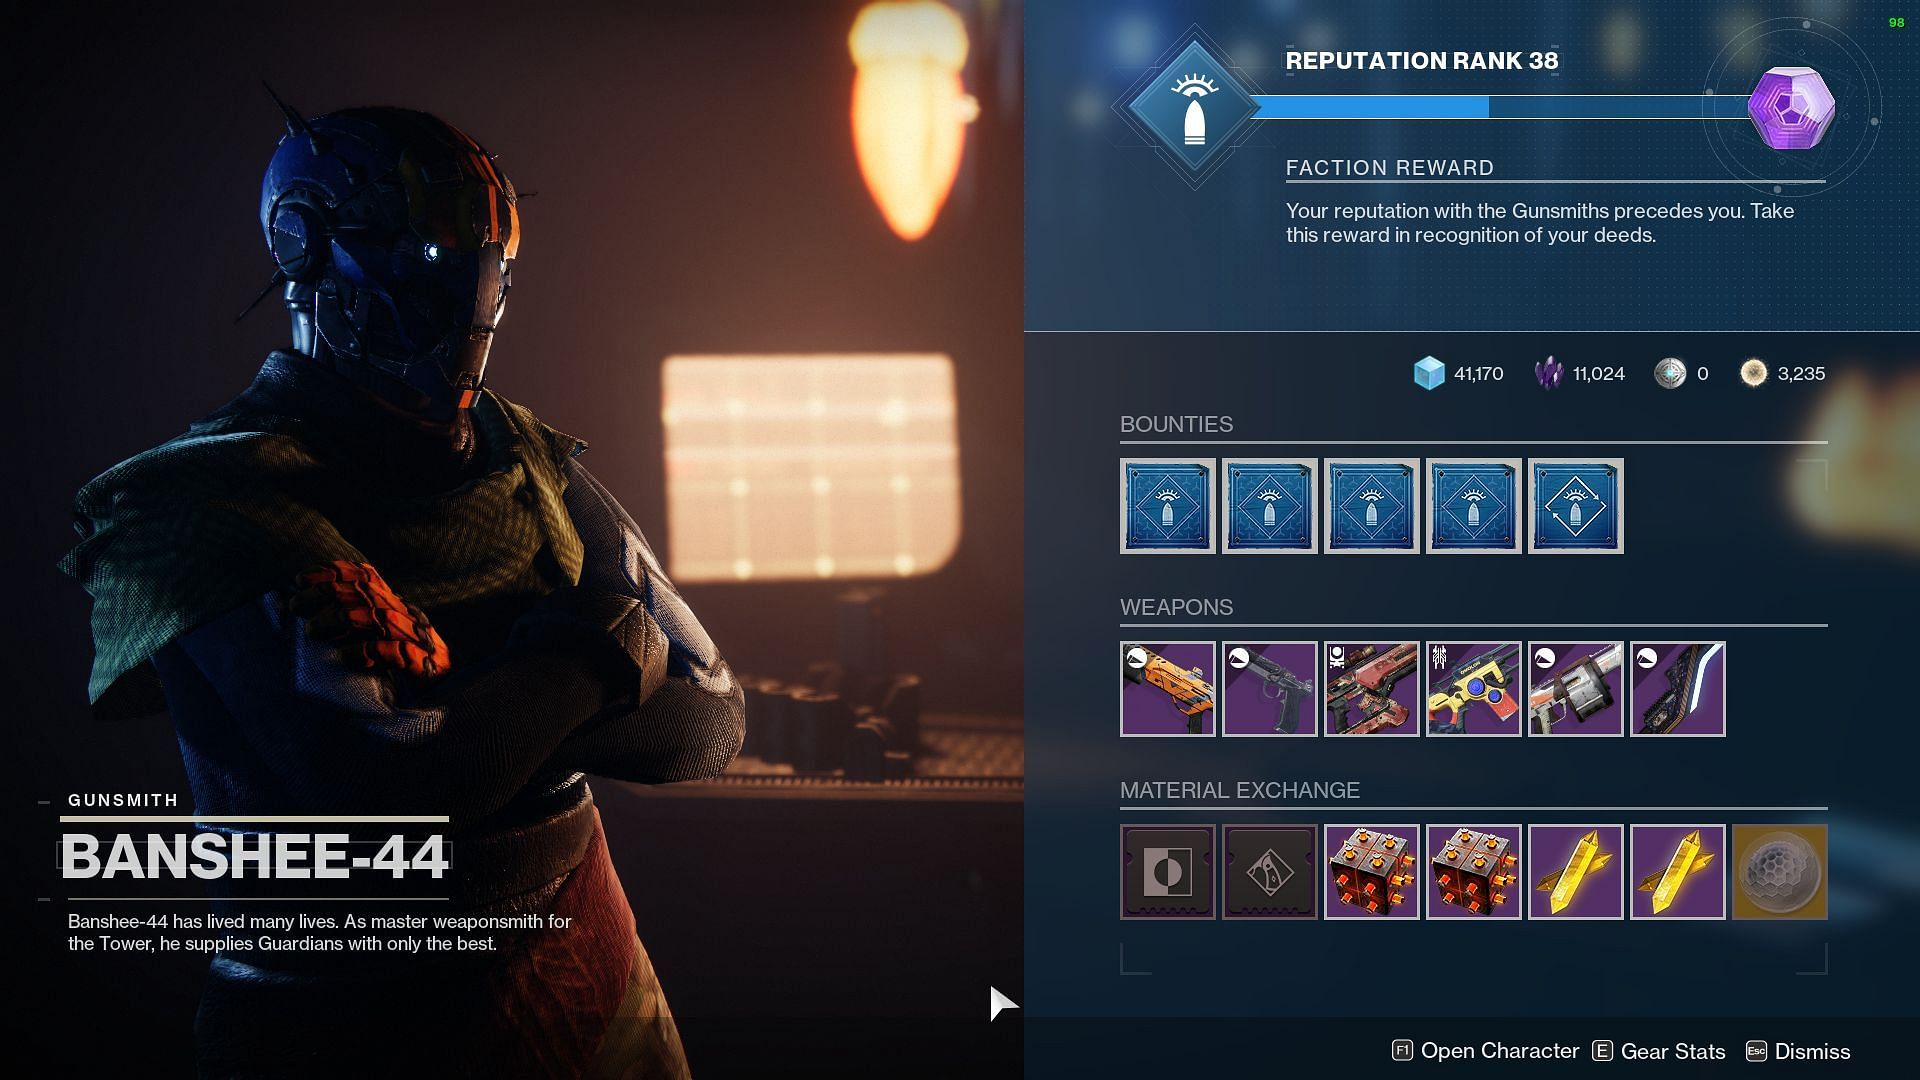 The Banshee-44 inventory at the Tower (Image via Bungie)